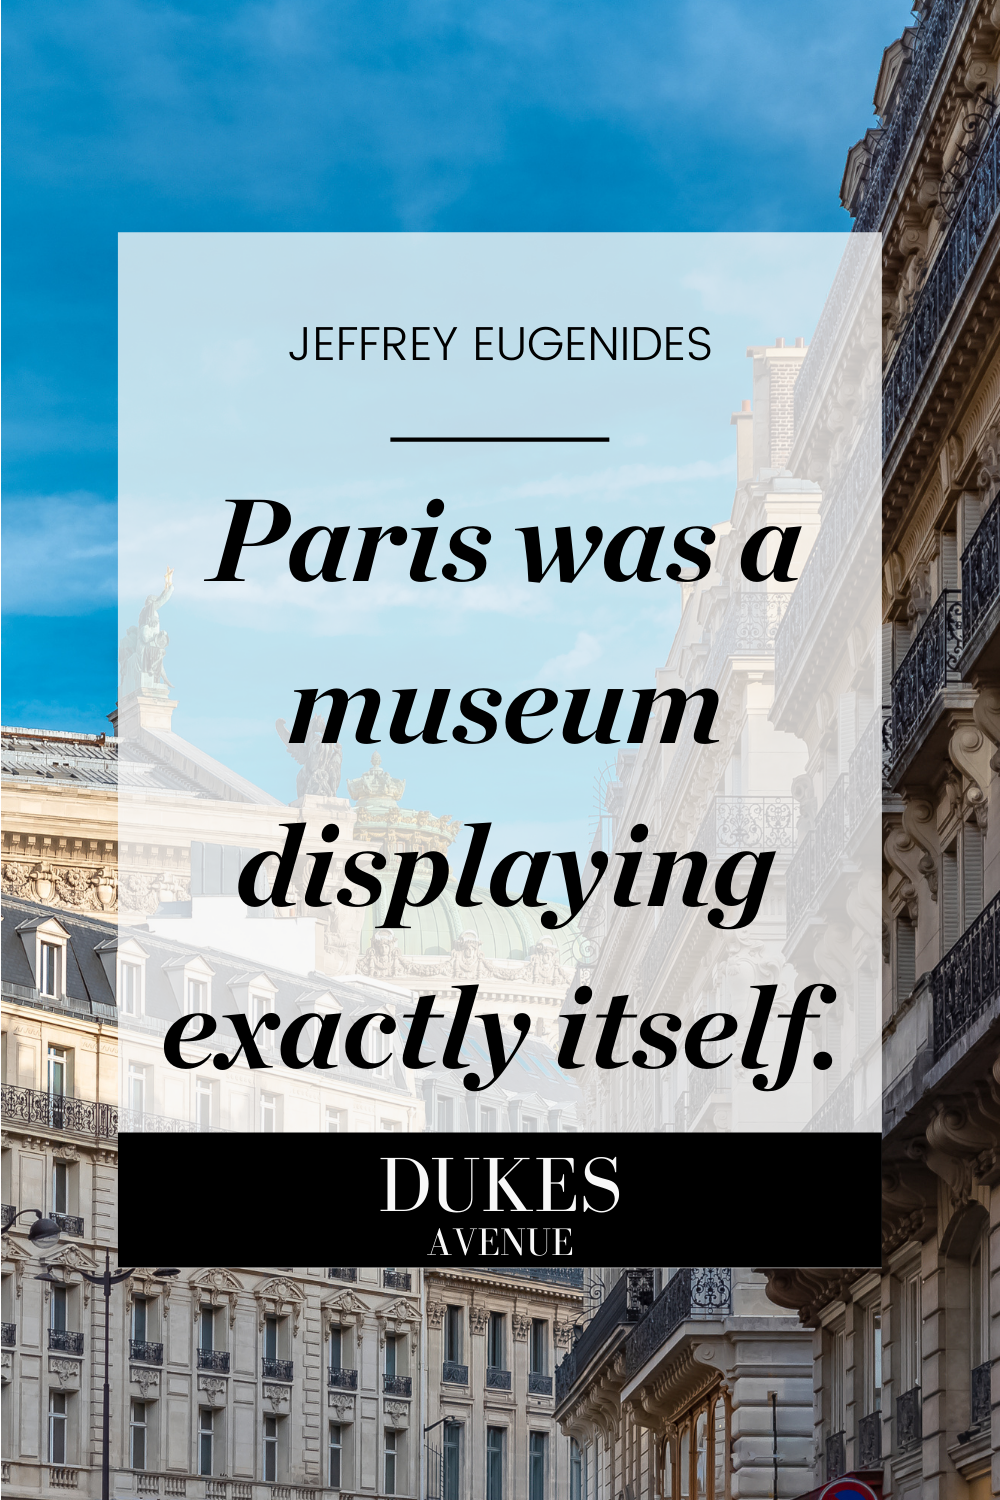 Picture of buildings in Paris with text overlay of one of Jeffrey Eugenides quotes about Paris